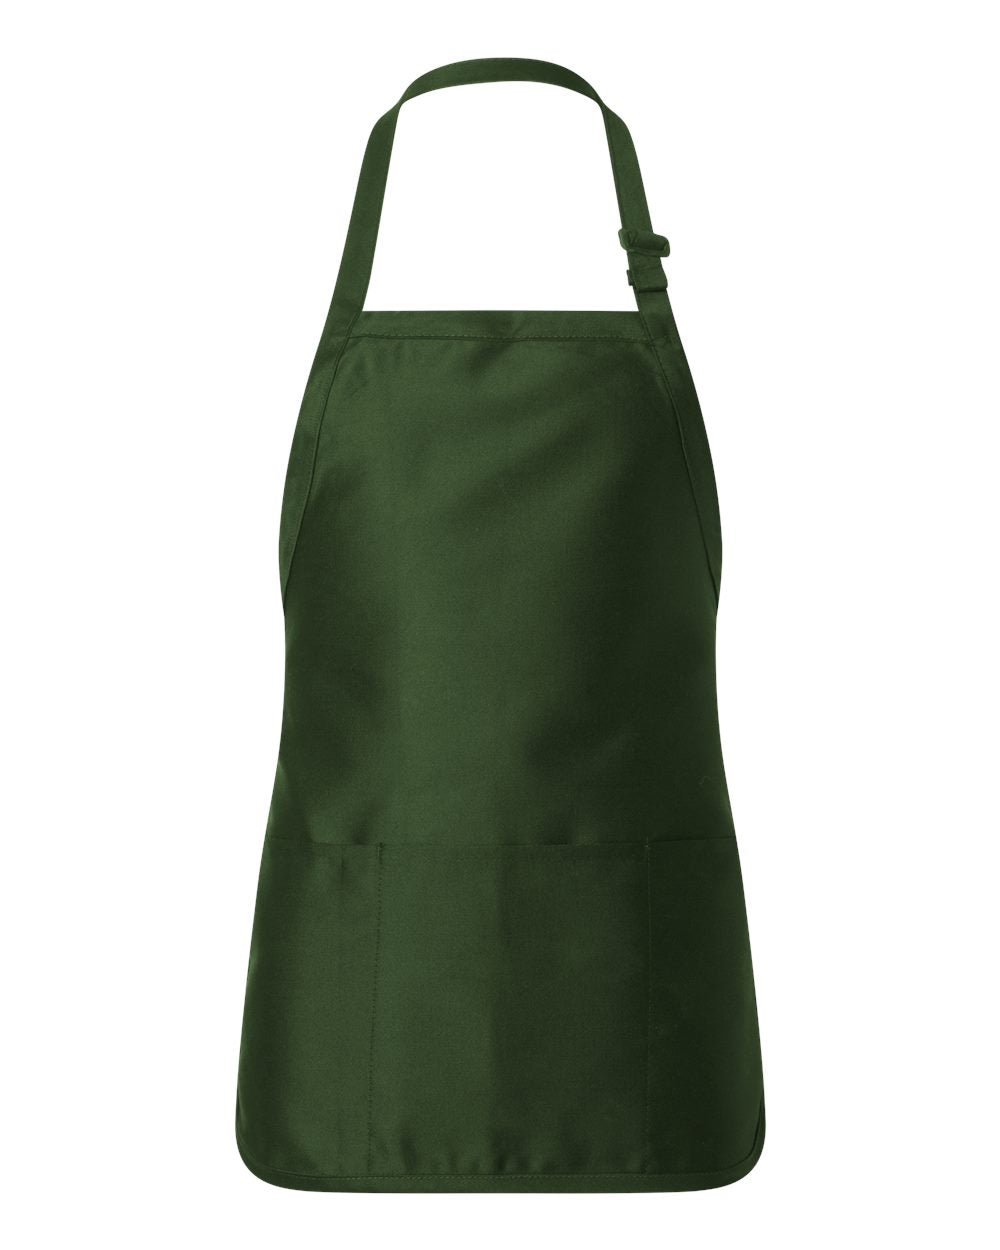 CUSTOM APRON (TELL ME DESIGN AT CHECKOUT TO USE)